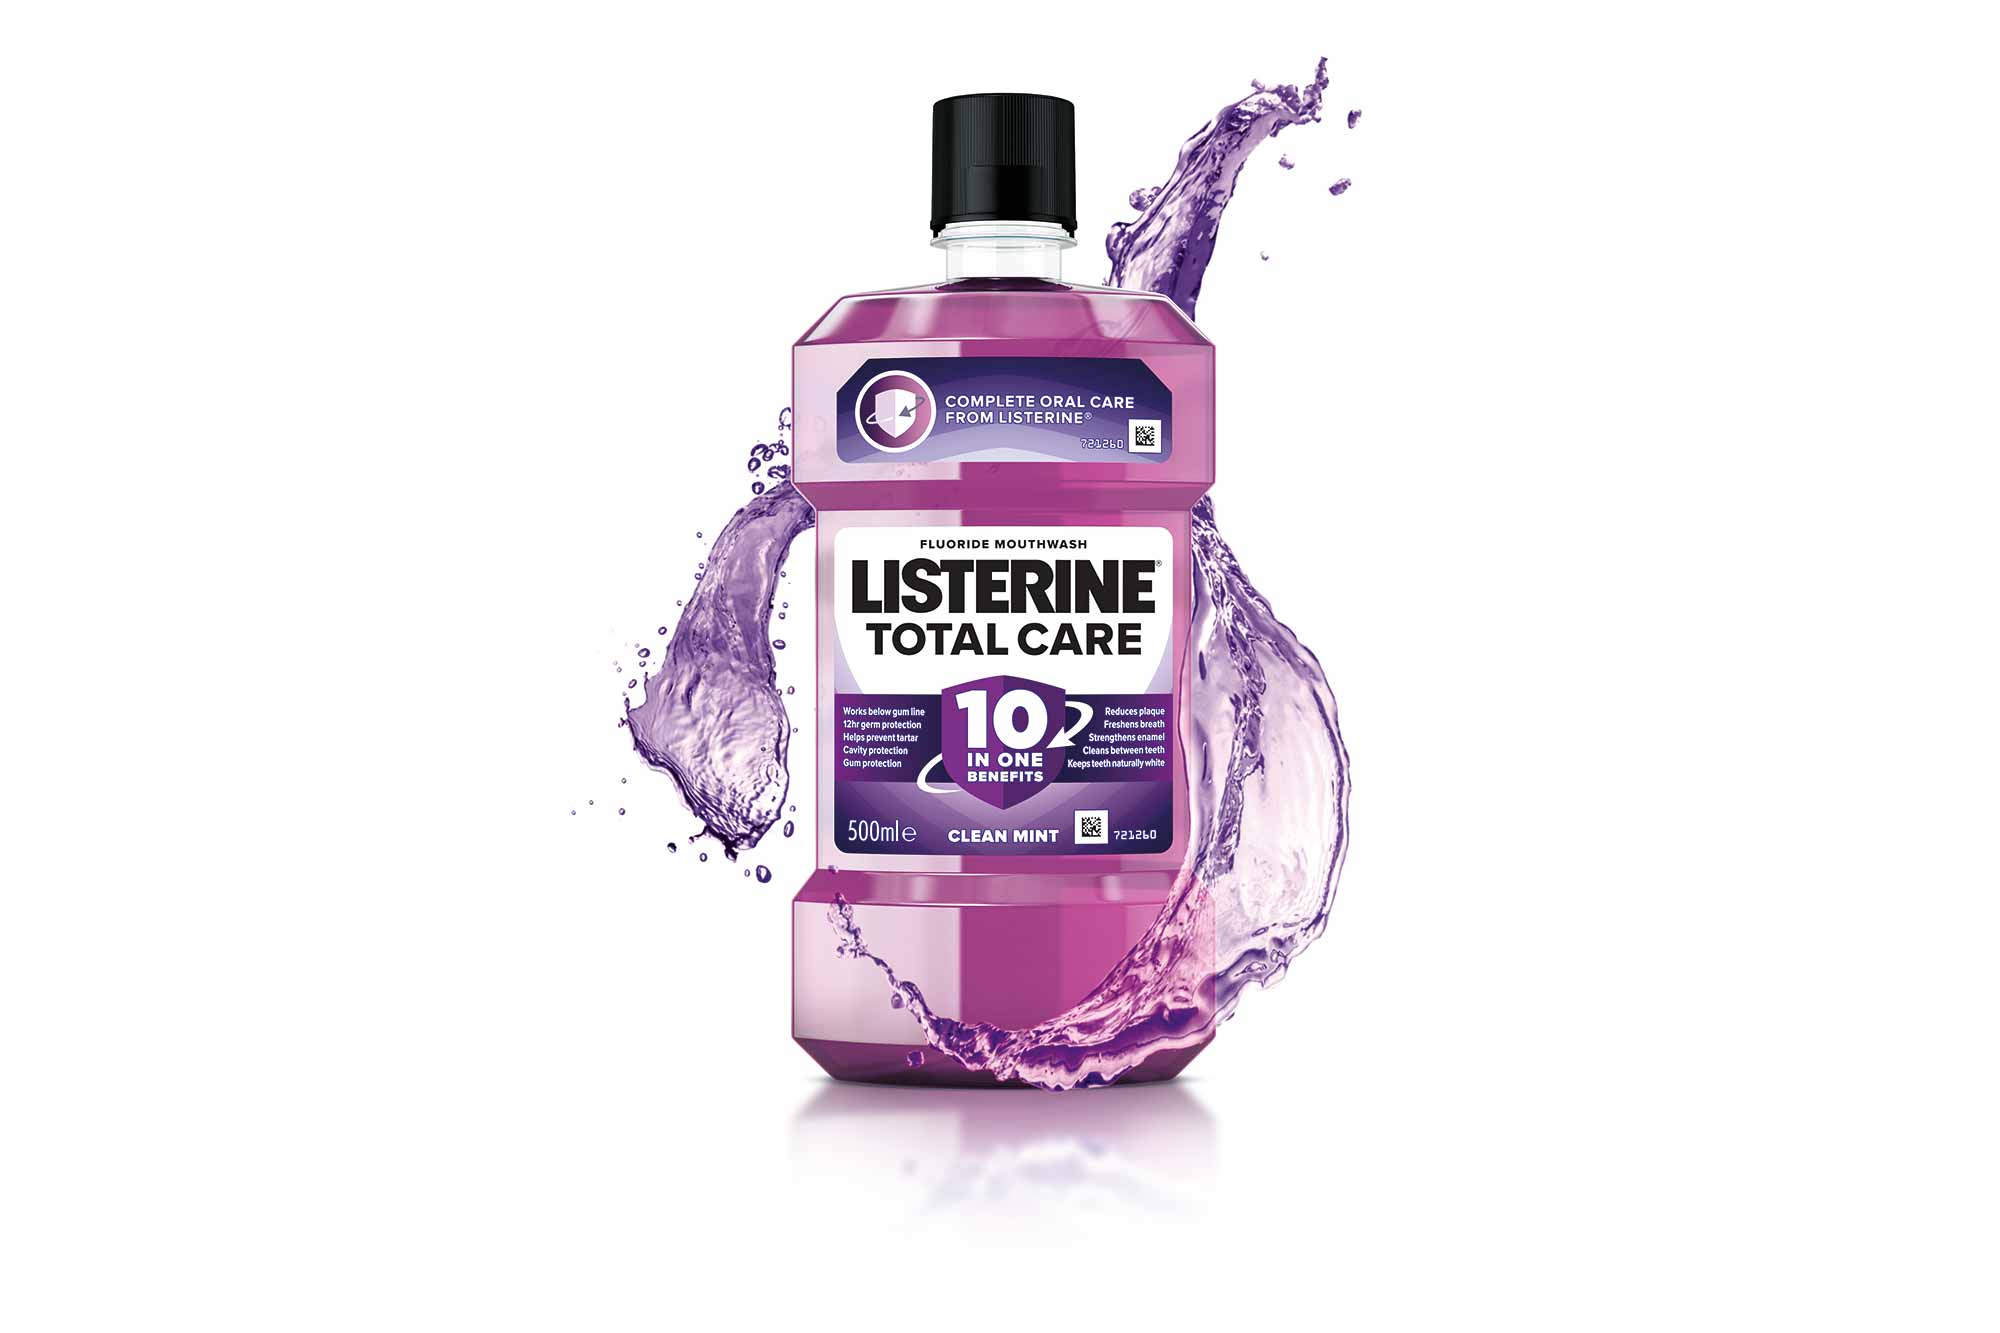 interdental cleaning listerine mouthwash